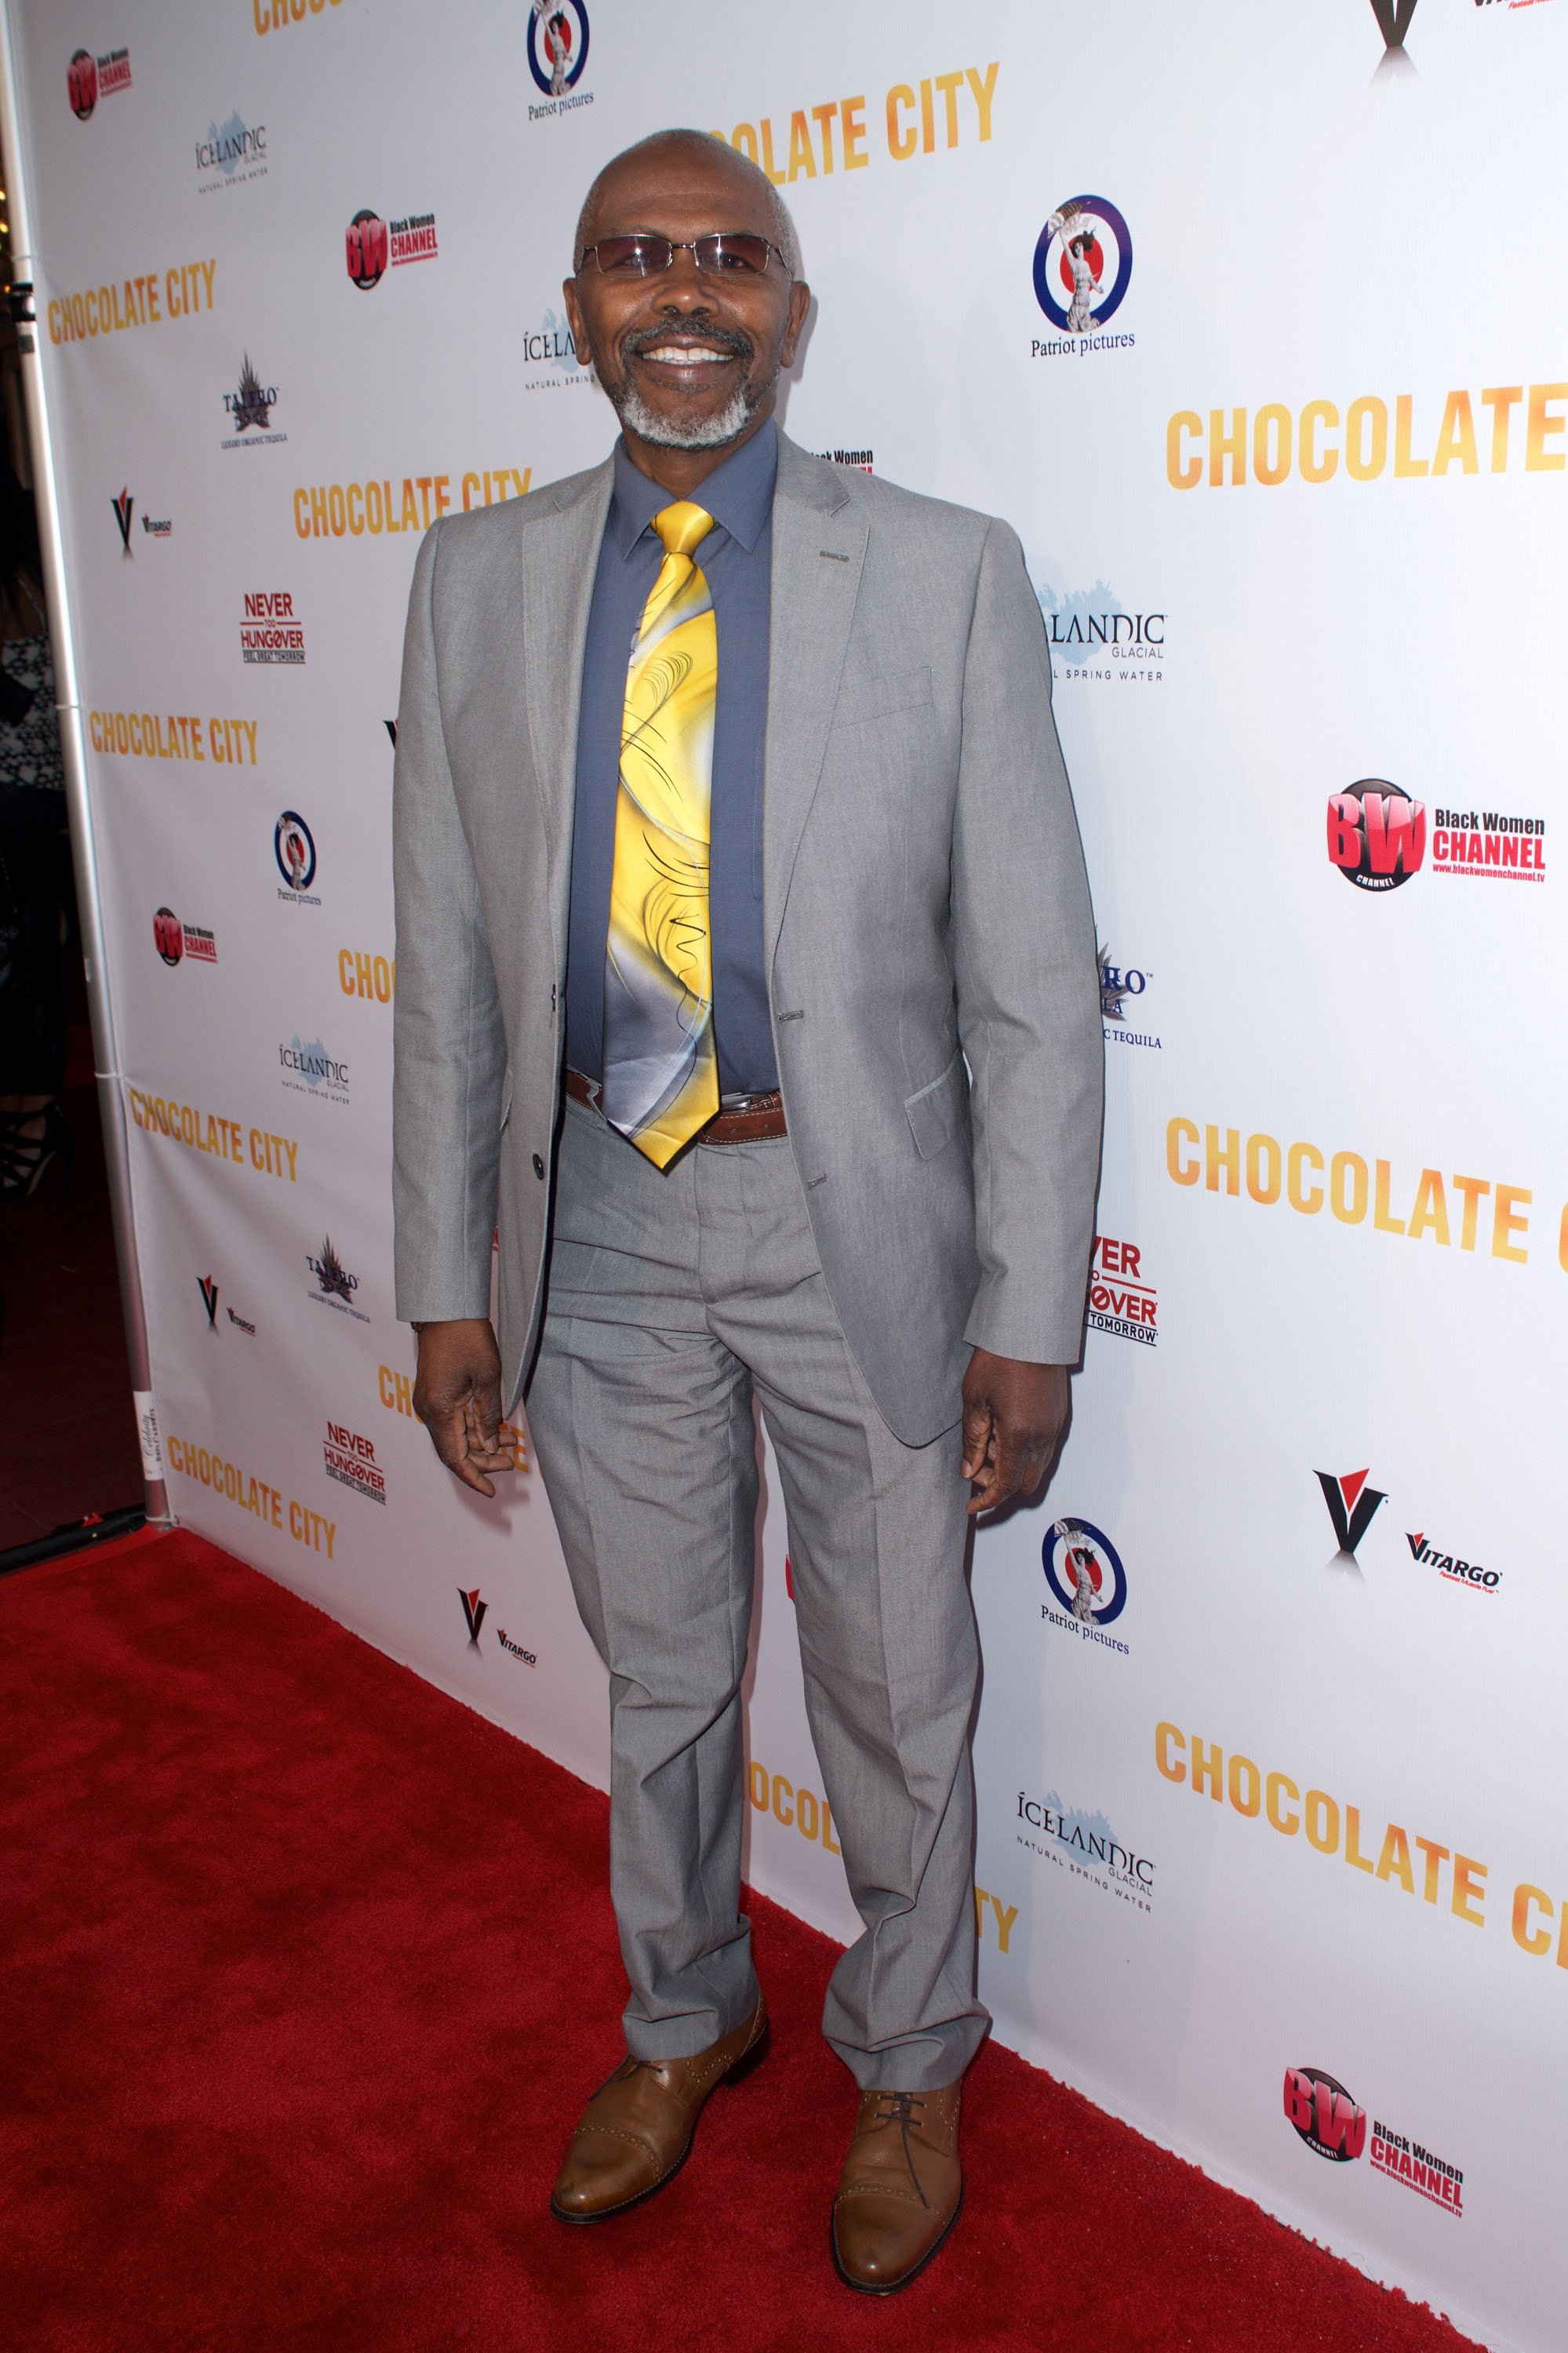 Actor Ernest Lee Thomas attends "Chocolate City" movie premiere at Crest Theatre on May 21, 2015 |Photo: Getty Images